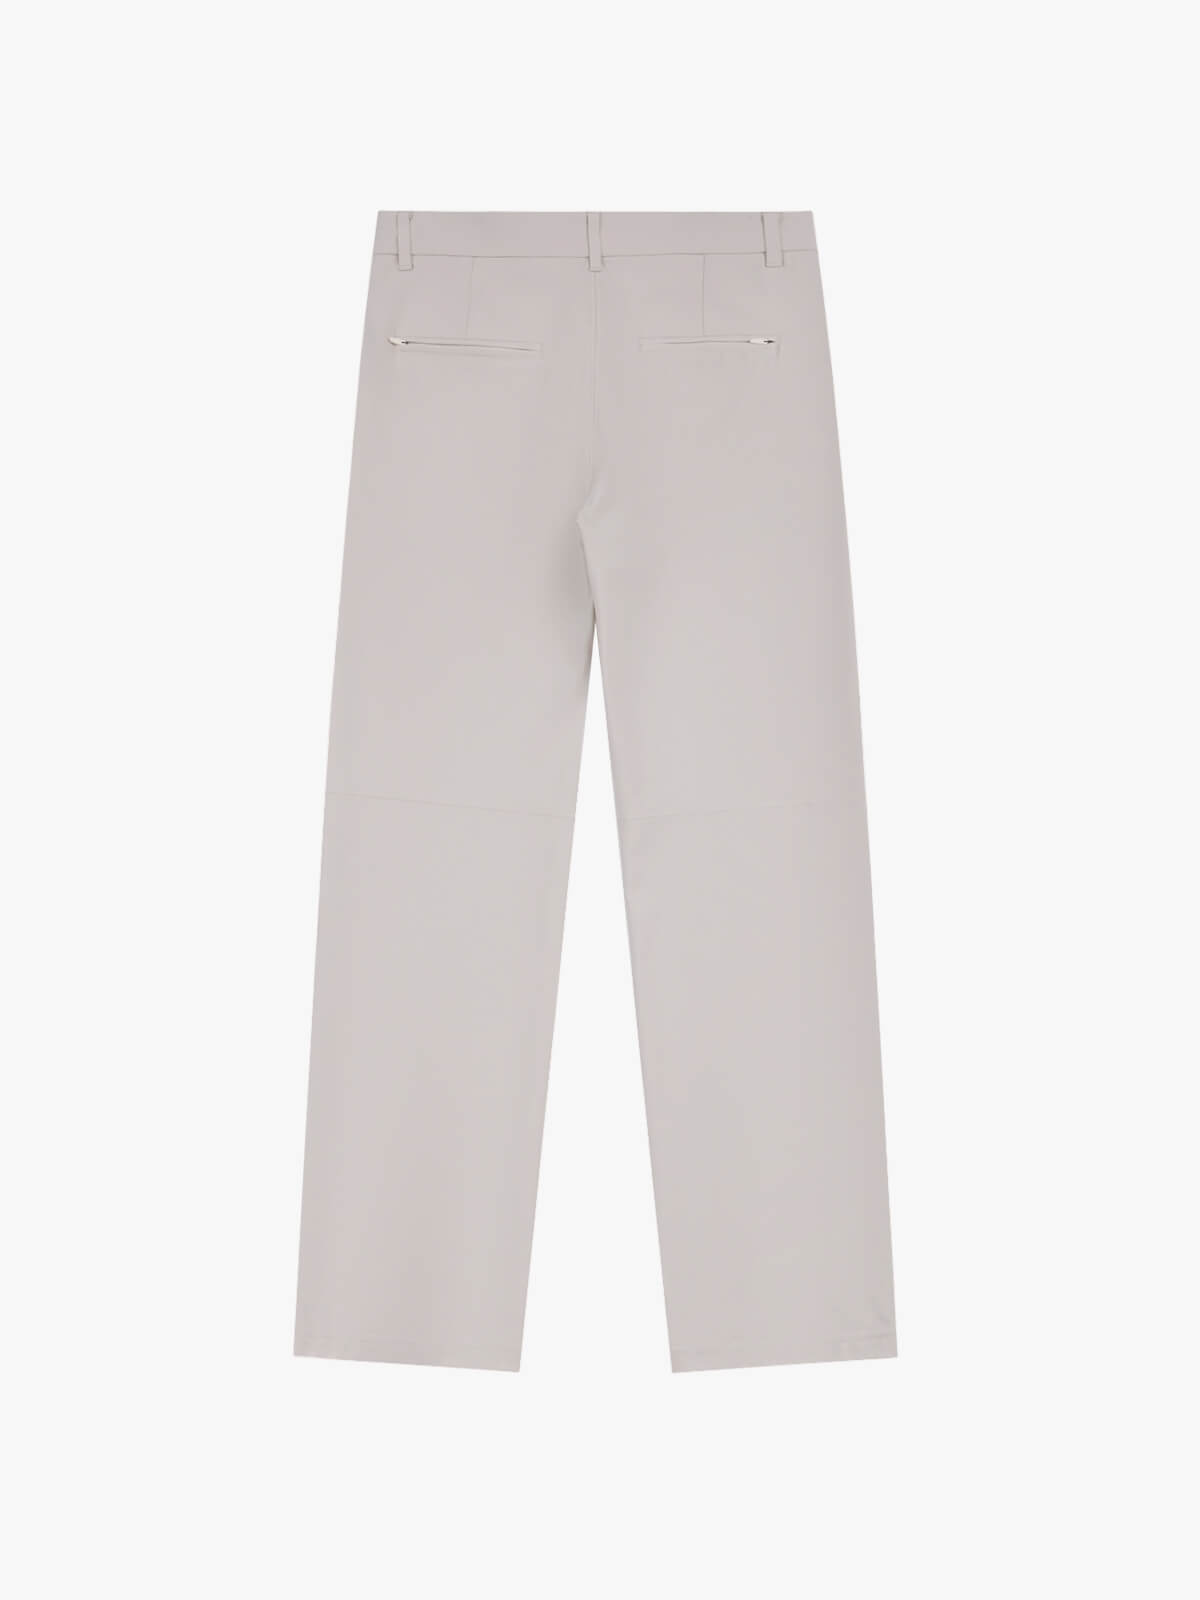 Simple Tapered Trousers Suitable for Work